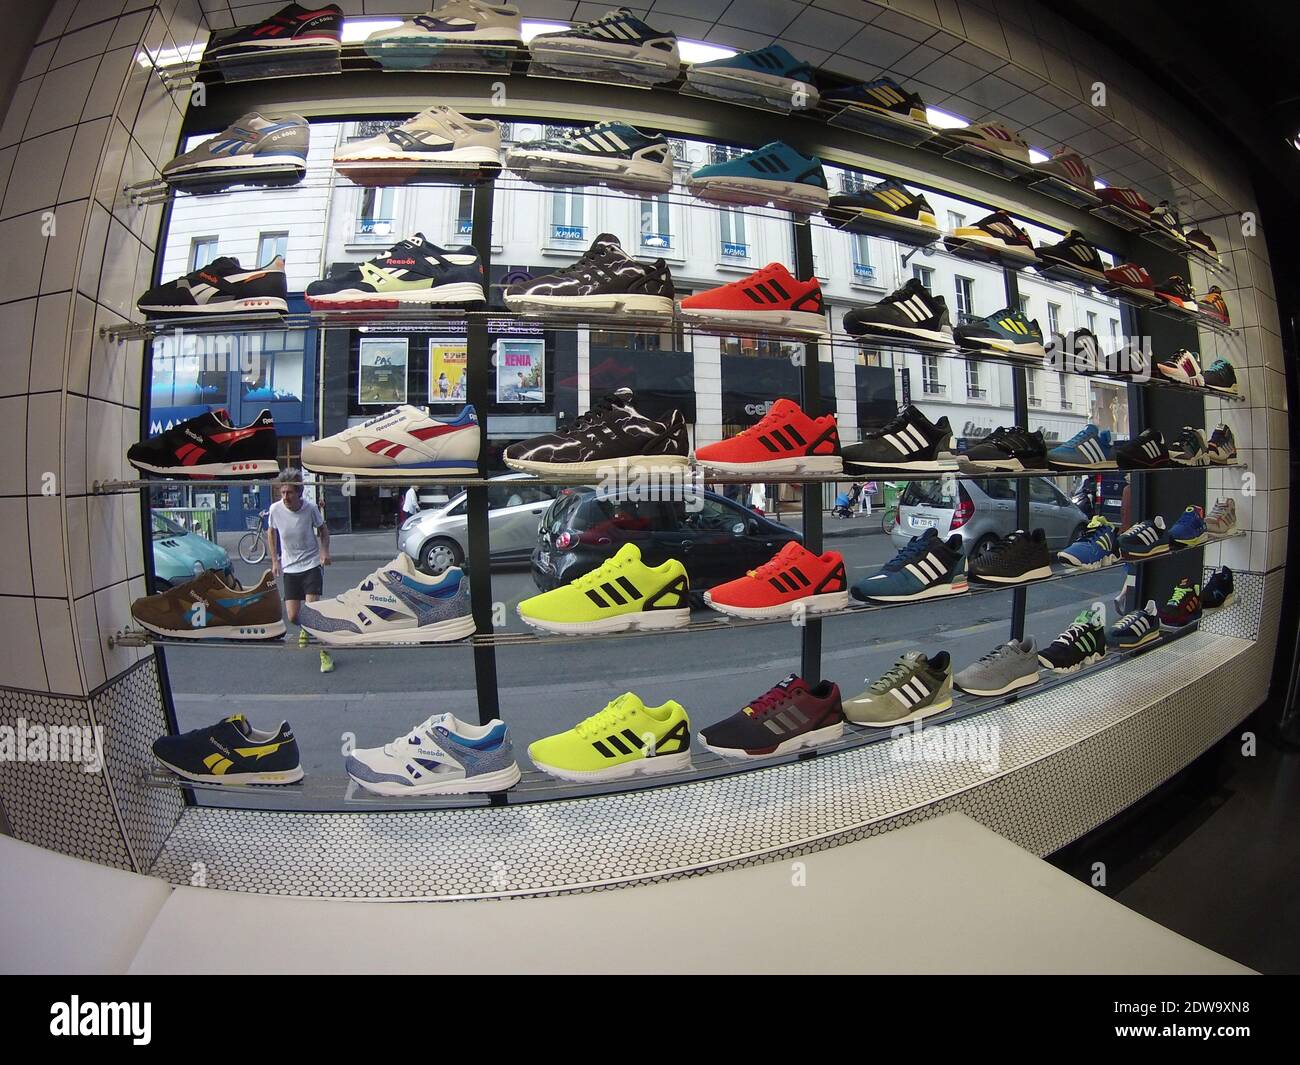 Atmosphere during the Reebok Concept Store Hub Bastille at Bastille in Paris,  France on June 20, 2014. Photo by Thierry Plessis/ABACAPRESS.COM Stock  Photo - Alamy